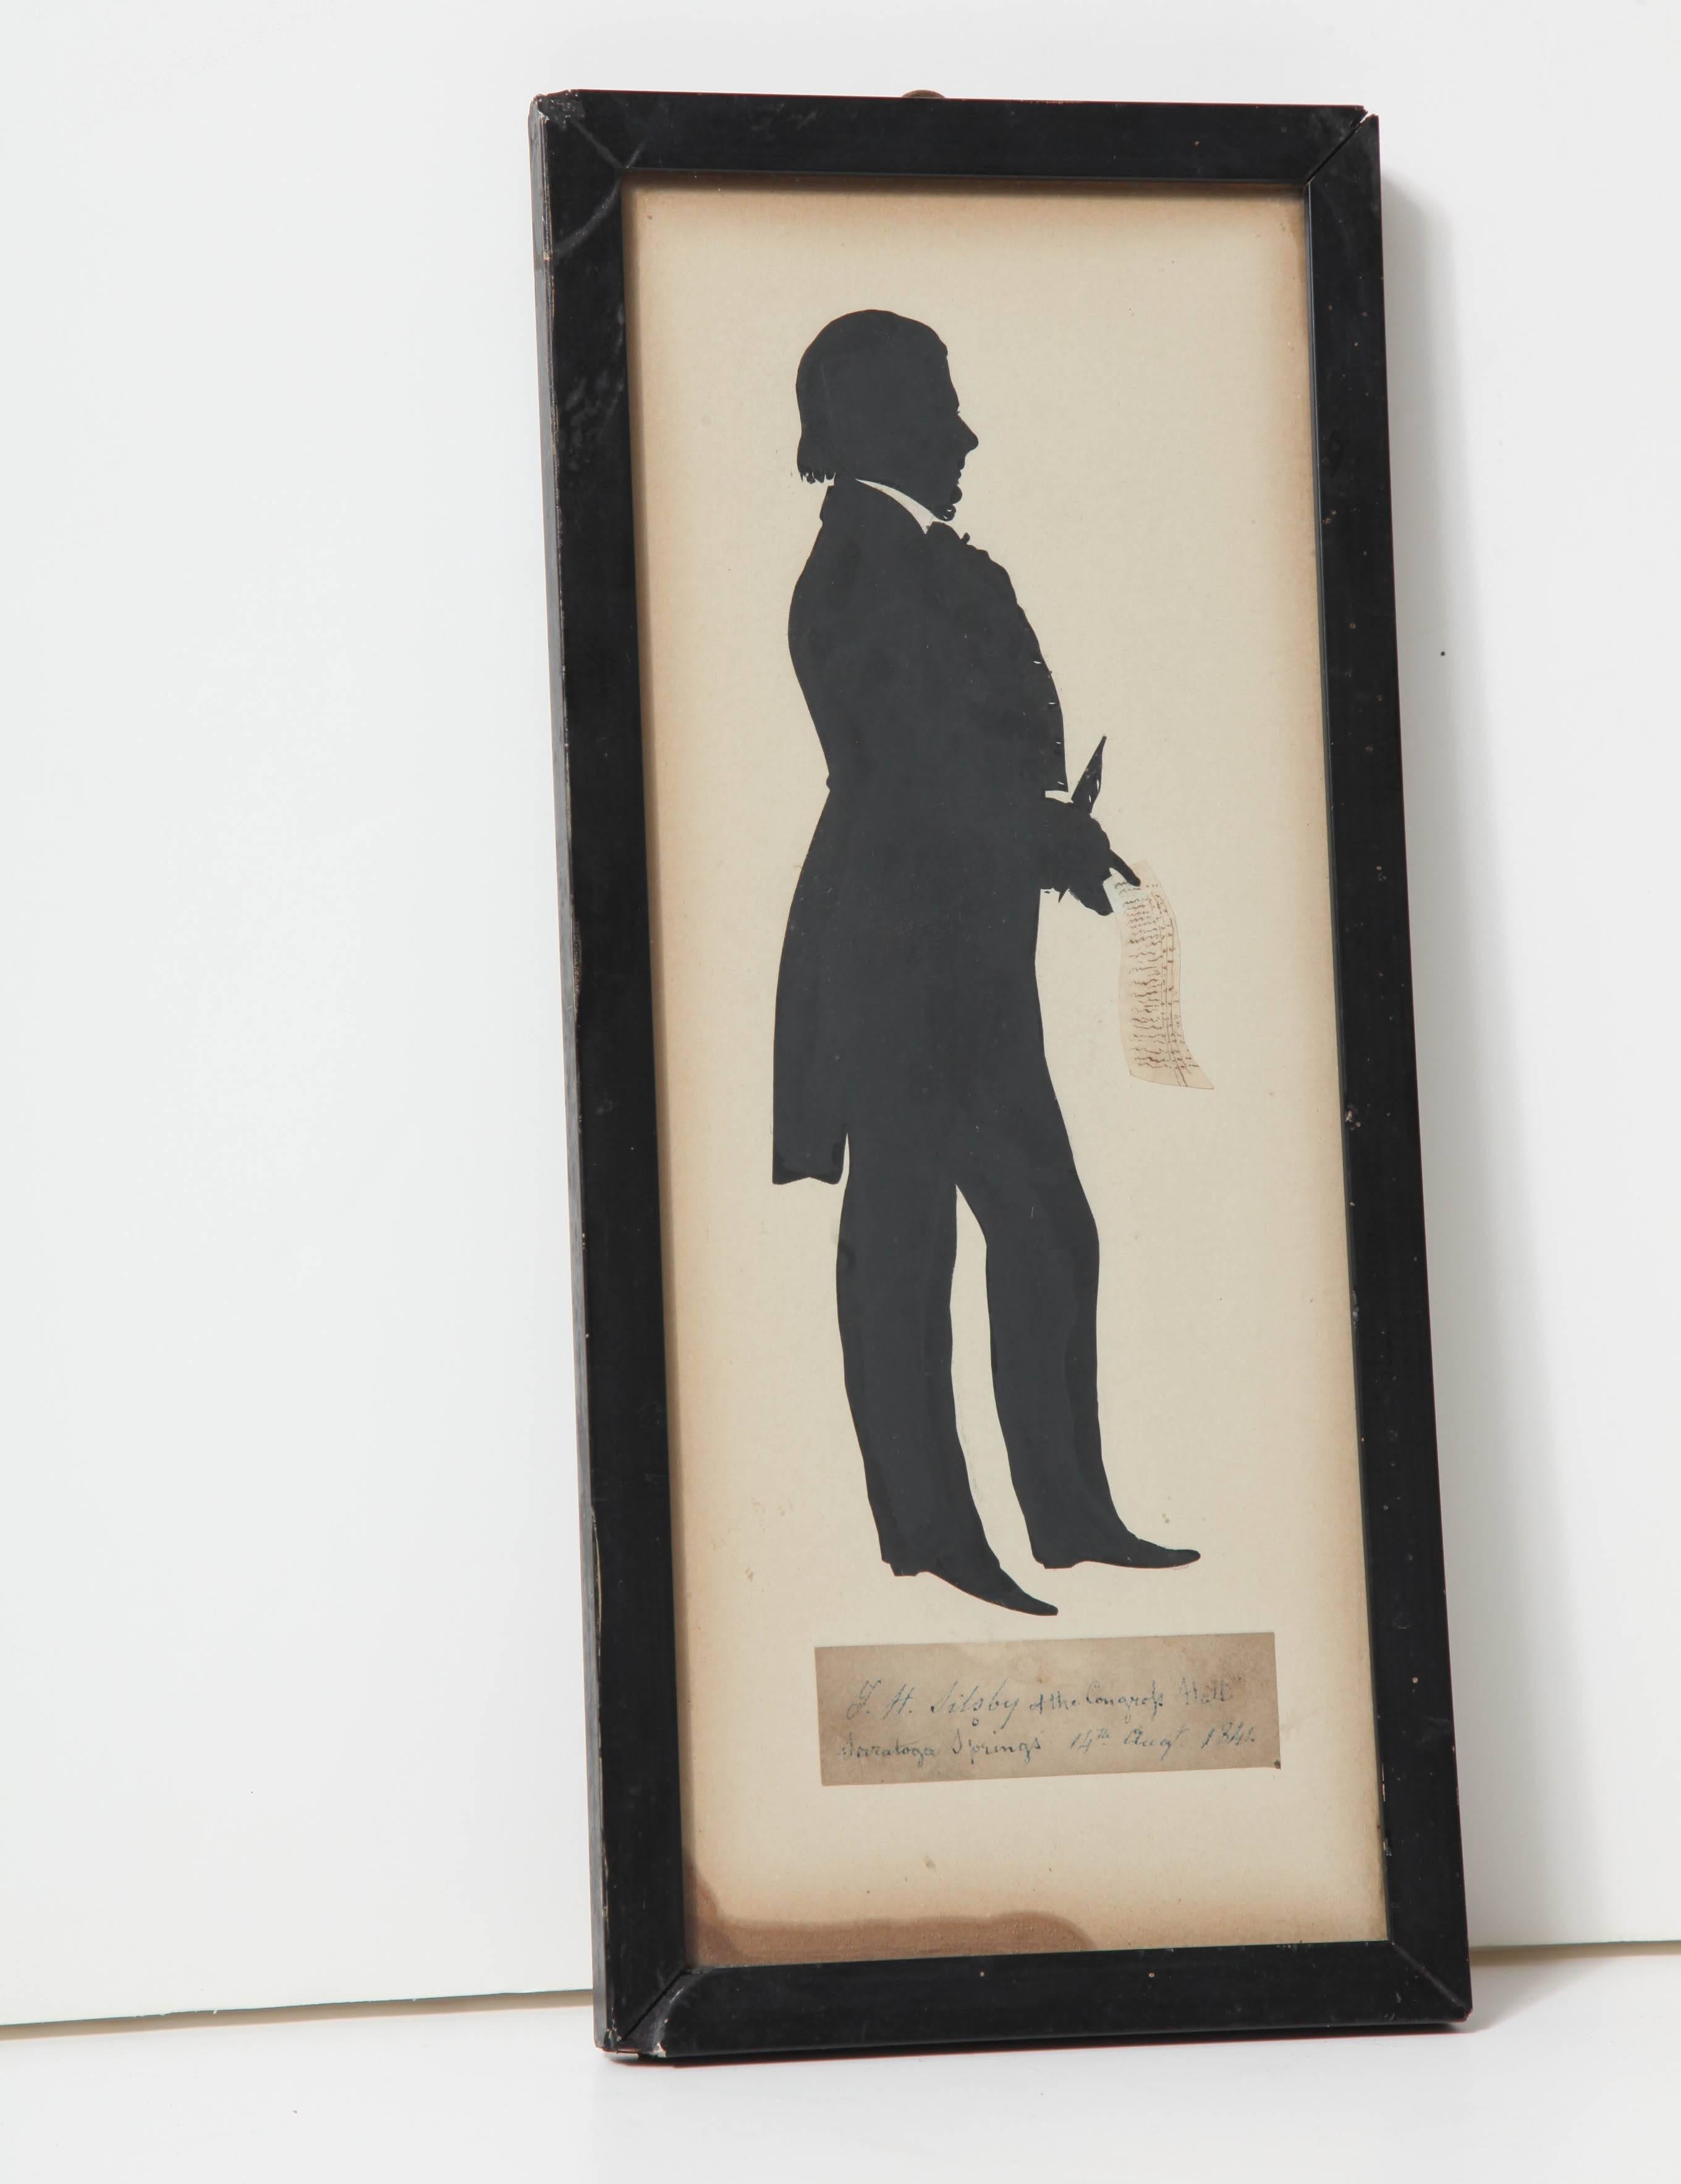 A 19th century American cut-paper silhouette of J.H. Silsby
signed and dated Saratoga Springs, August 14th, 1841
with an authenticating paper label from Arthur S. Vernay on the reverse
in a black frame, double-sided glass to show Edouart